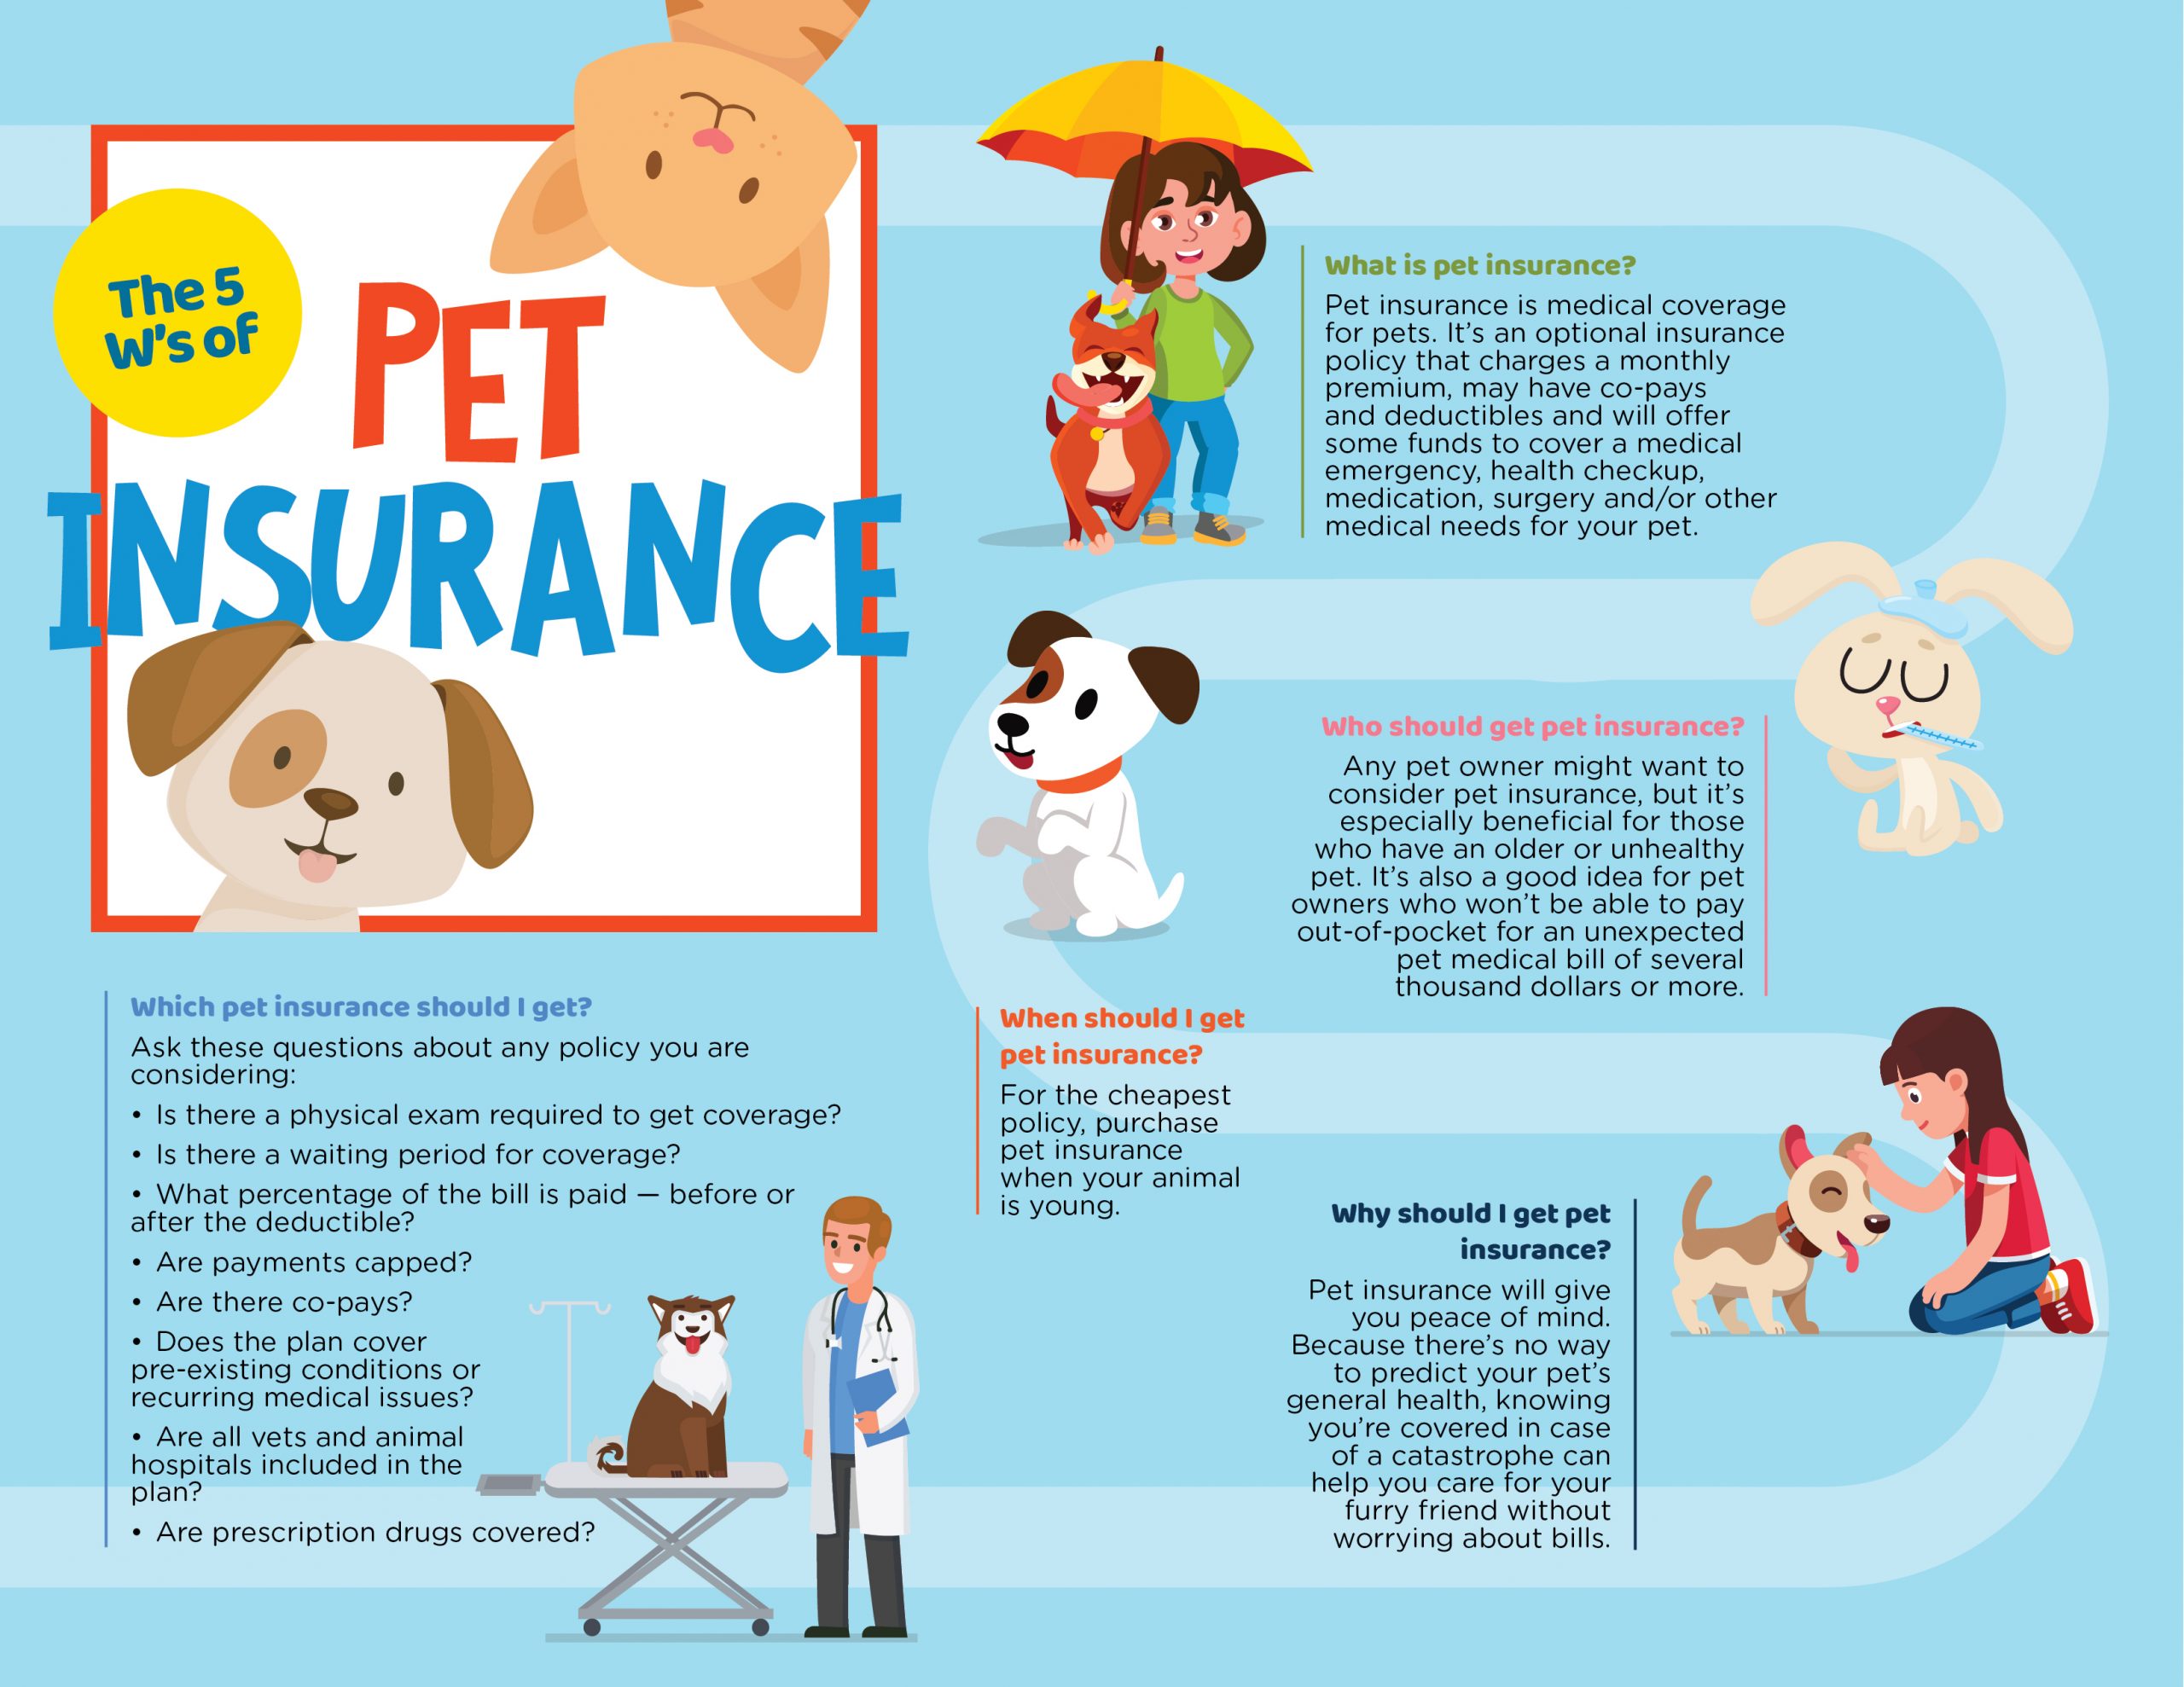 Pet insurance plans for dogs